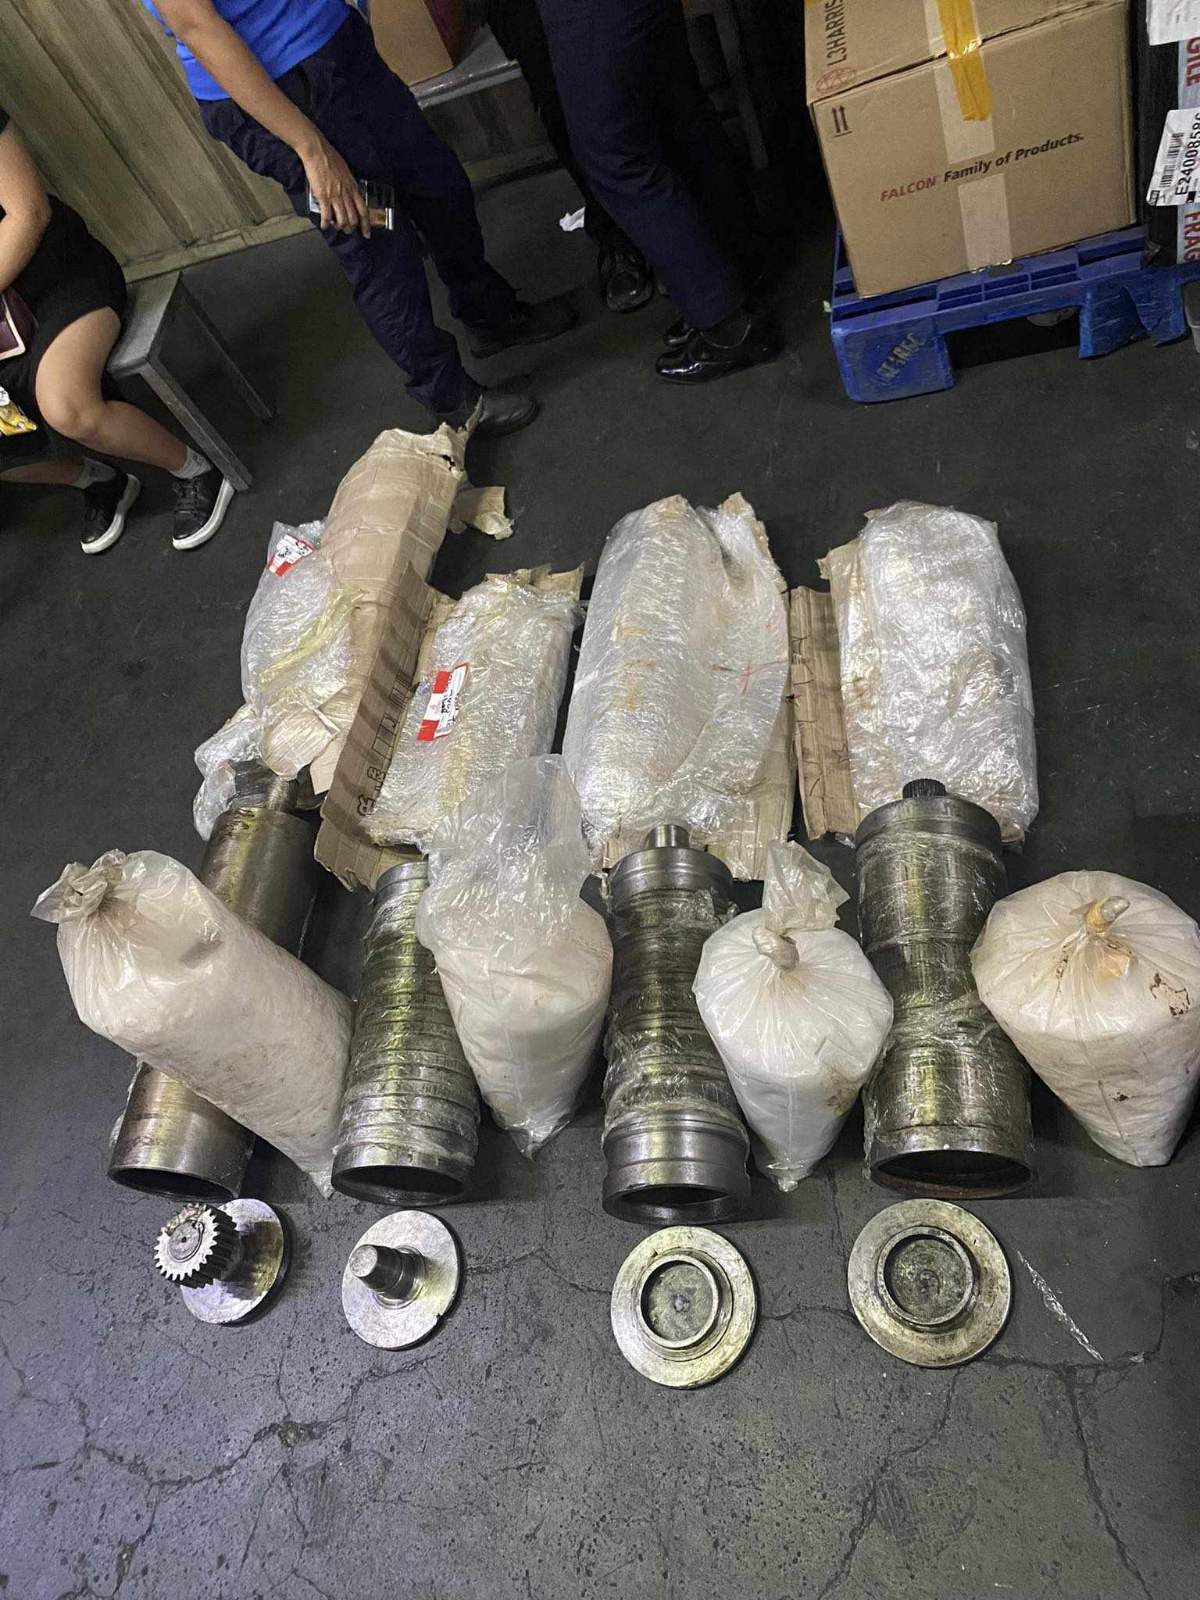 A 28-year-old woman was arrested on Wednesday after authorities seized a shipment containing over P200 million worth of crystal meth or “shabu” addressed to her, according to the Philippine Drug Enforcement Agency (PDEA). 